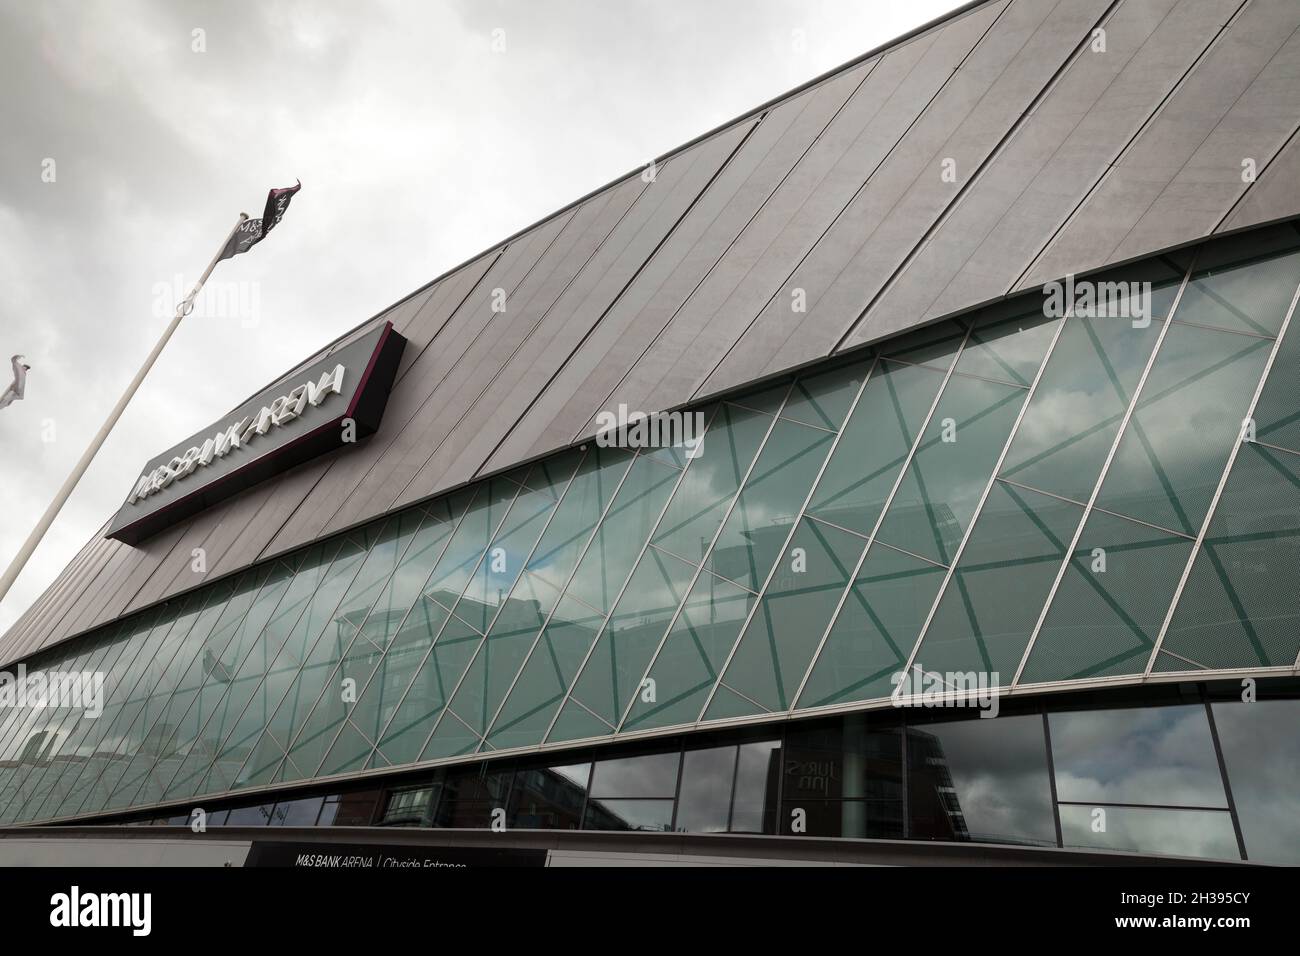 M&S Bank Arena at Liverpool Stock Photo